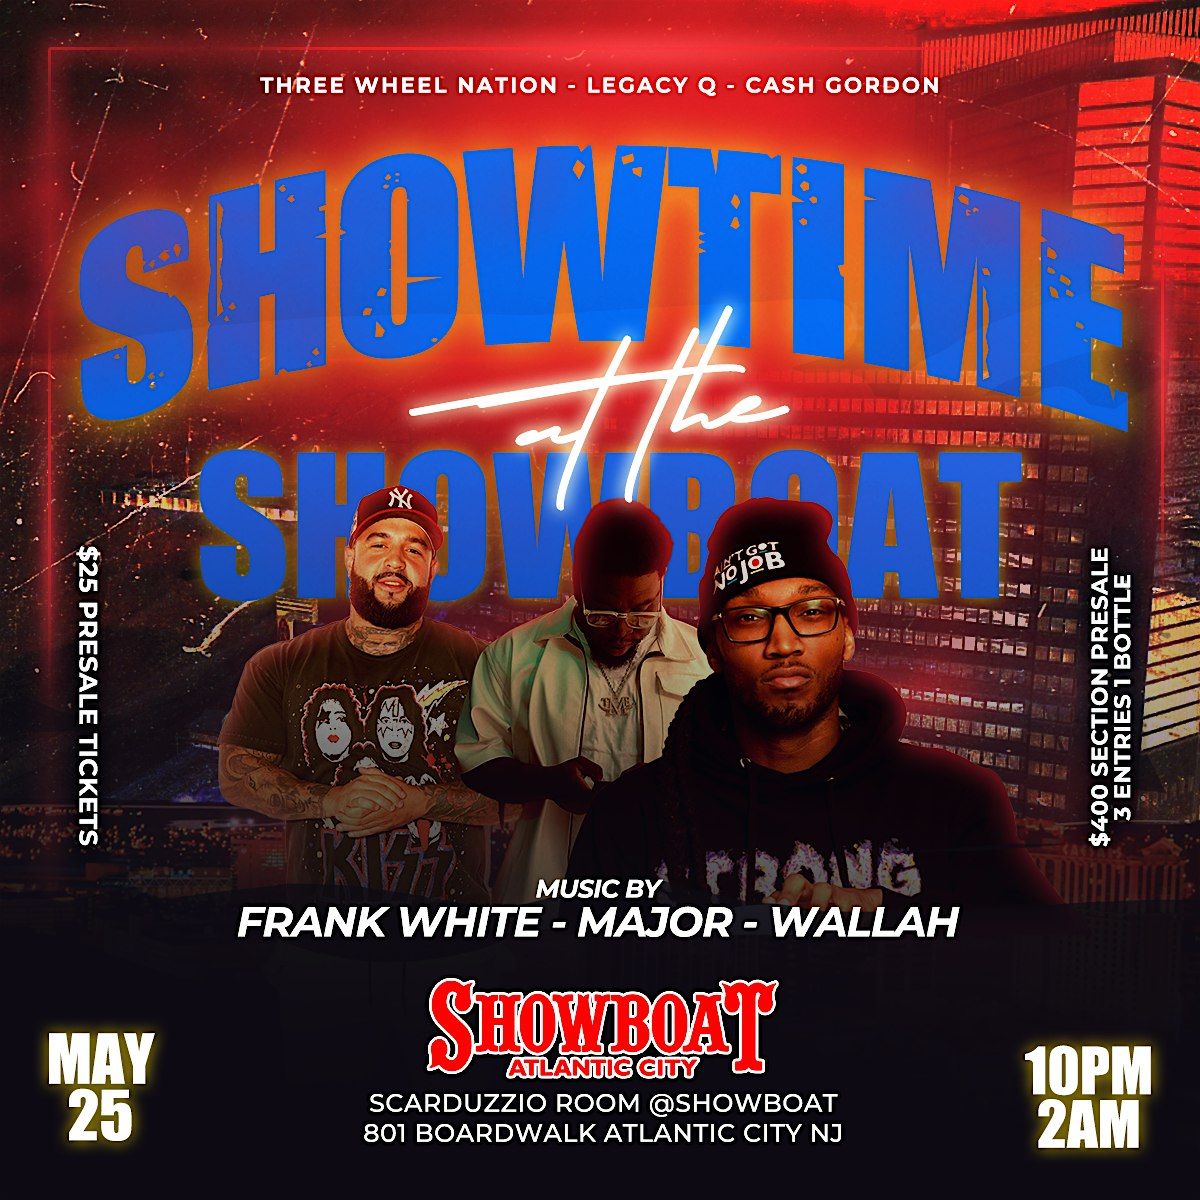 Showtime at the SHOWBOAT (Memorial Day Weekend)